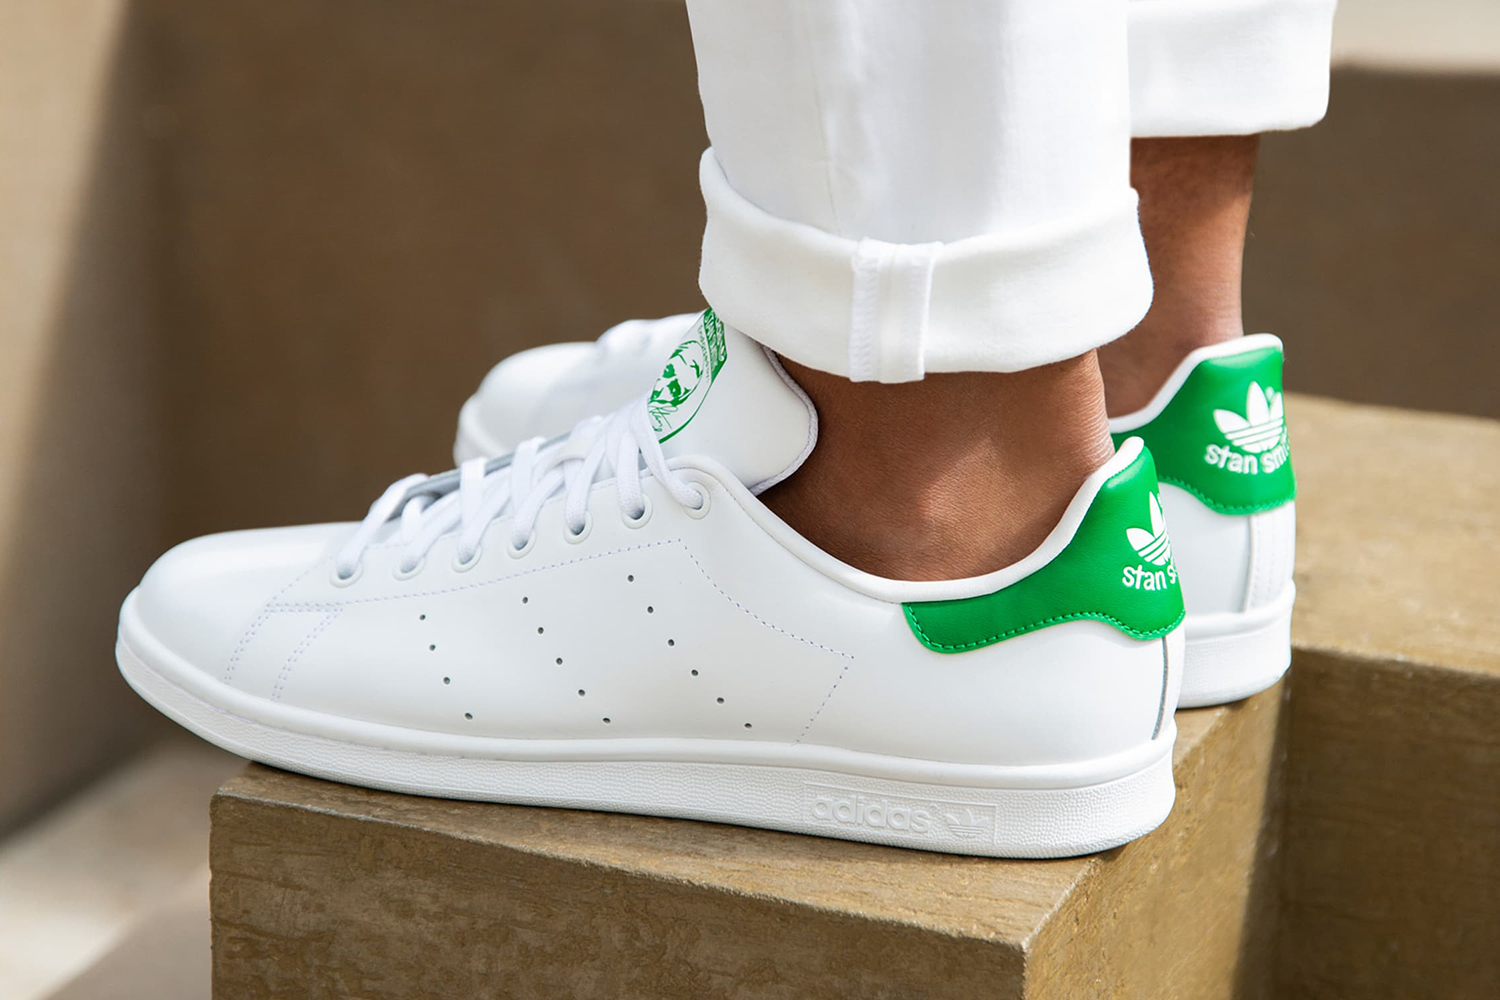 Adidas Stan Smith Sneakers Are 25% Off 